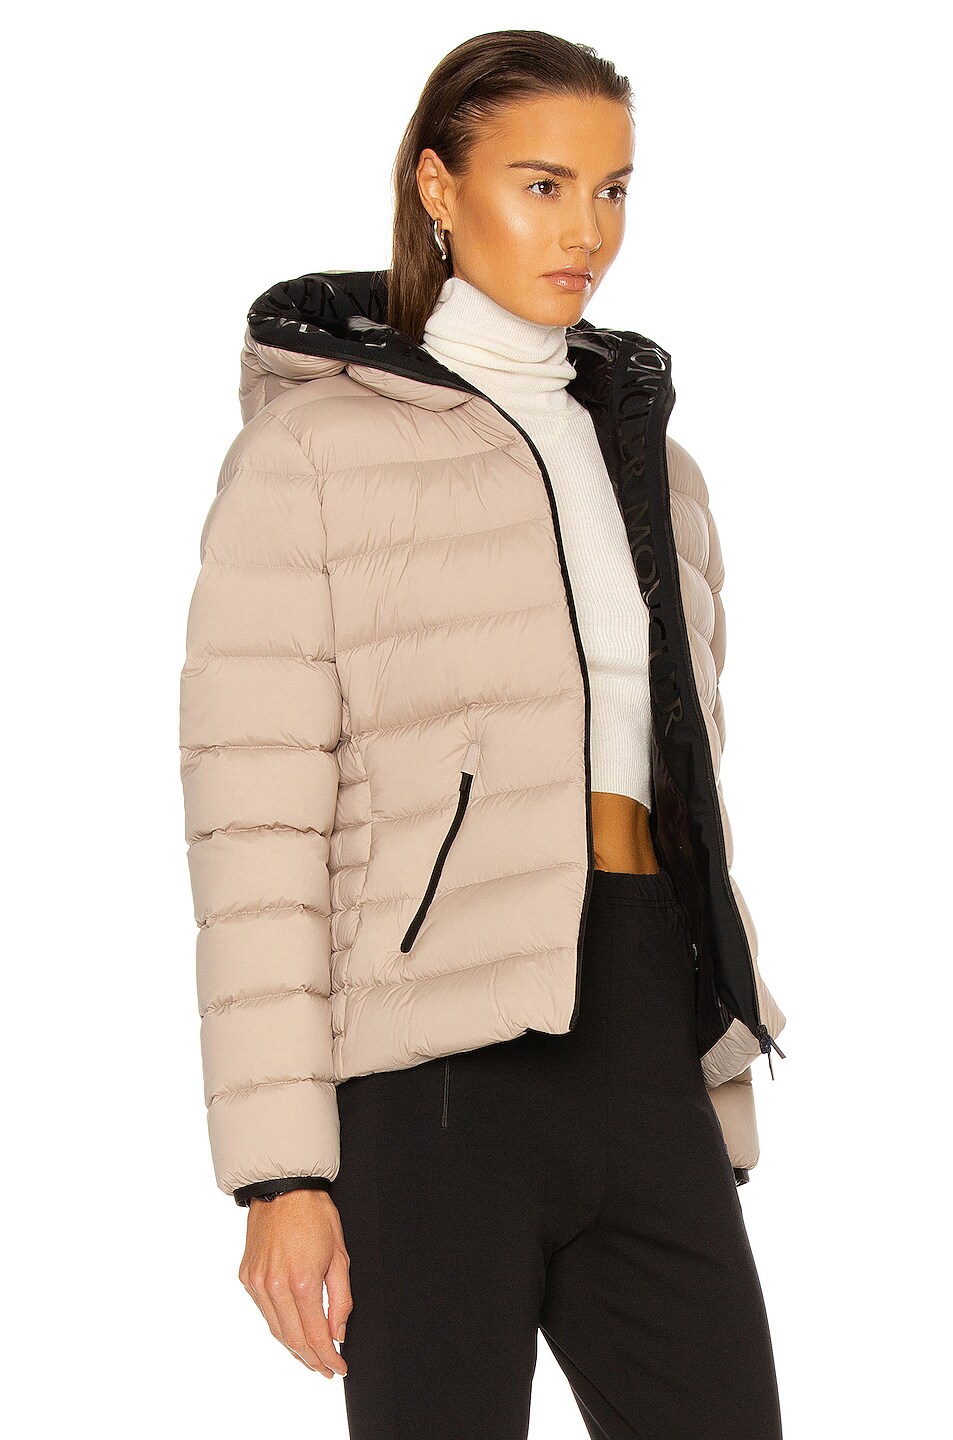 Moncler Herbe Jacket in Champagne | FWRD